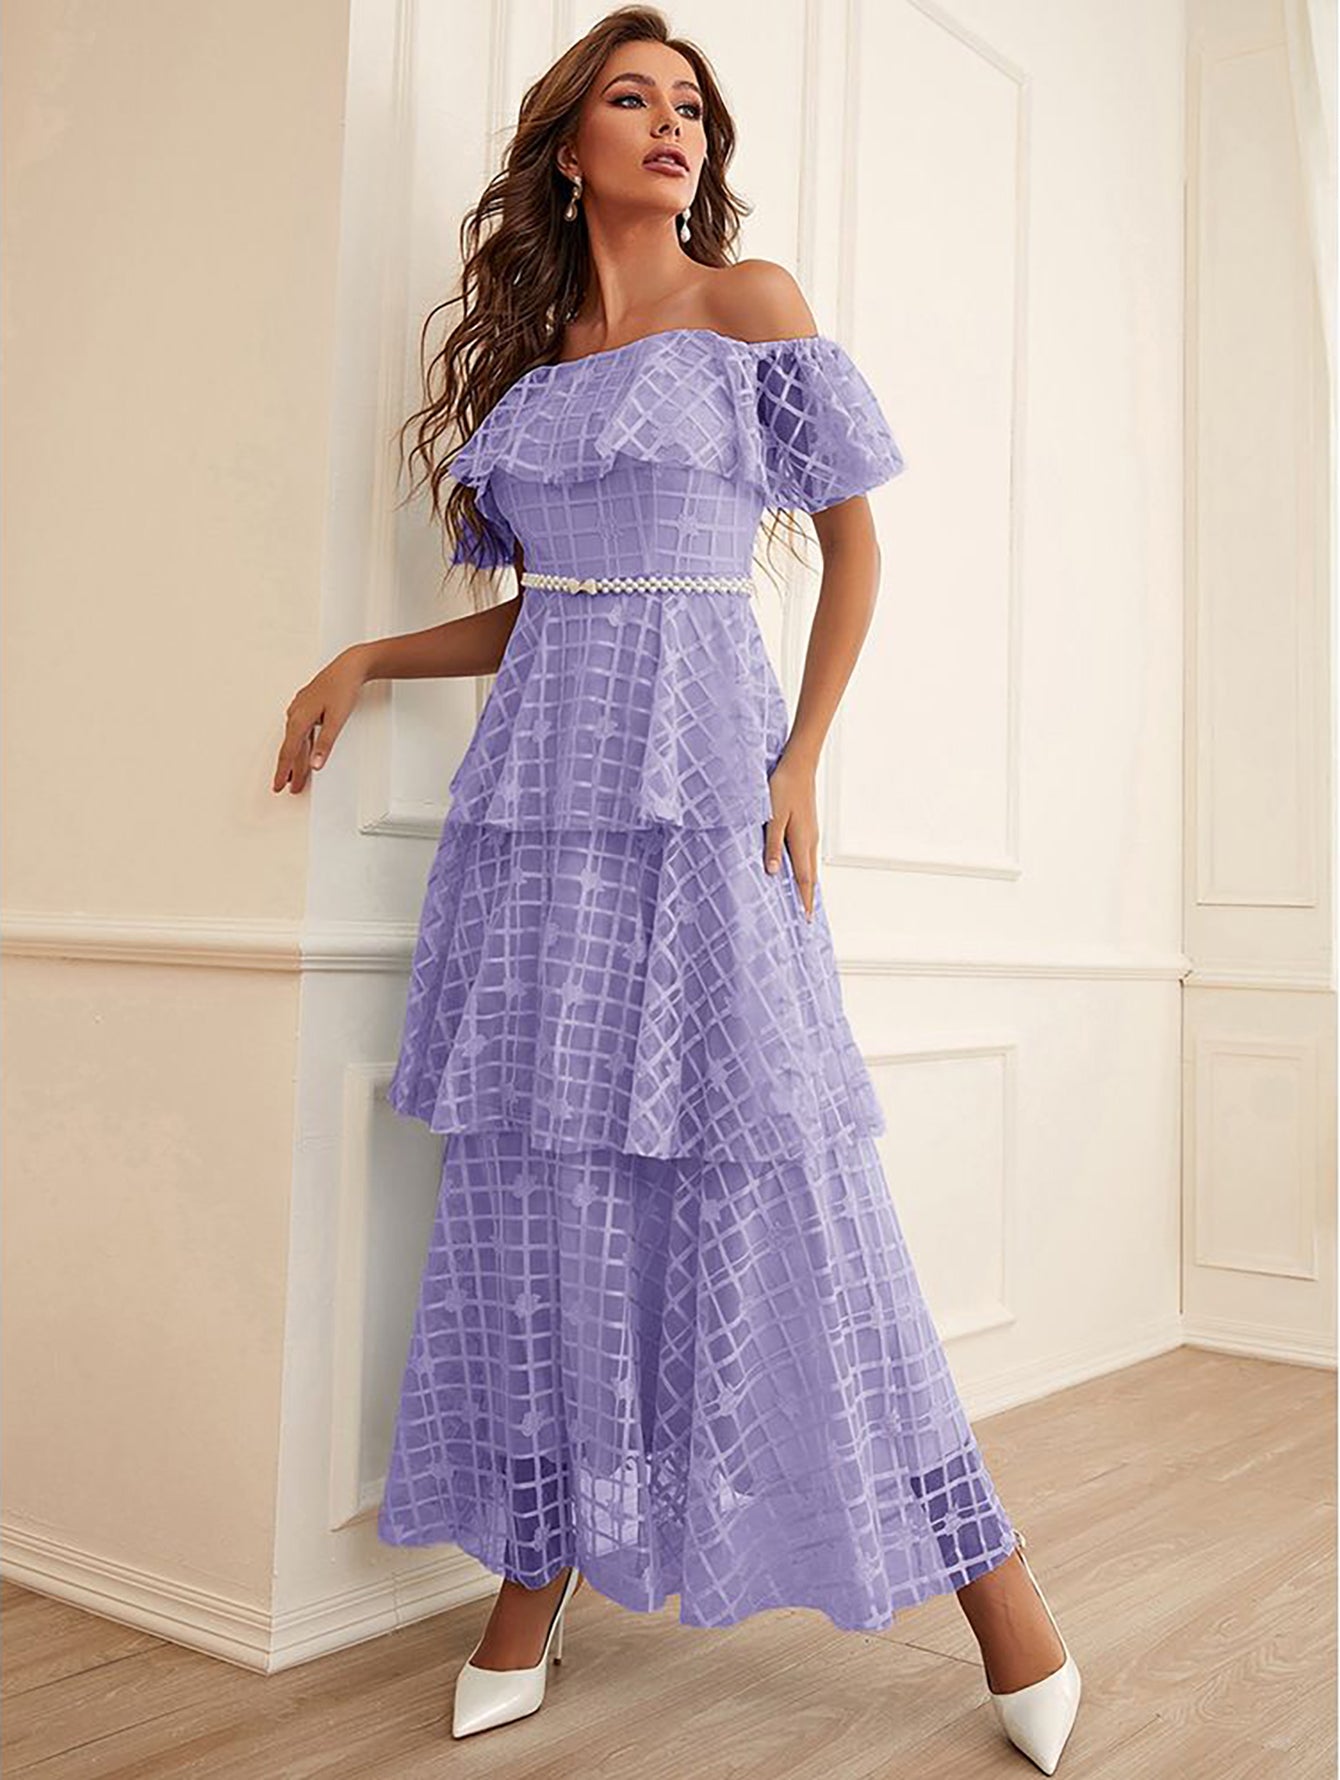 Strapless Off The Shoulder Purple Layered Dress